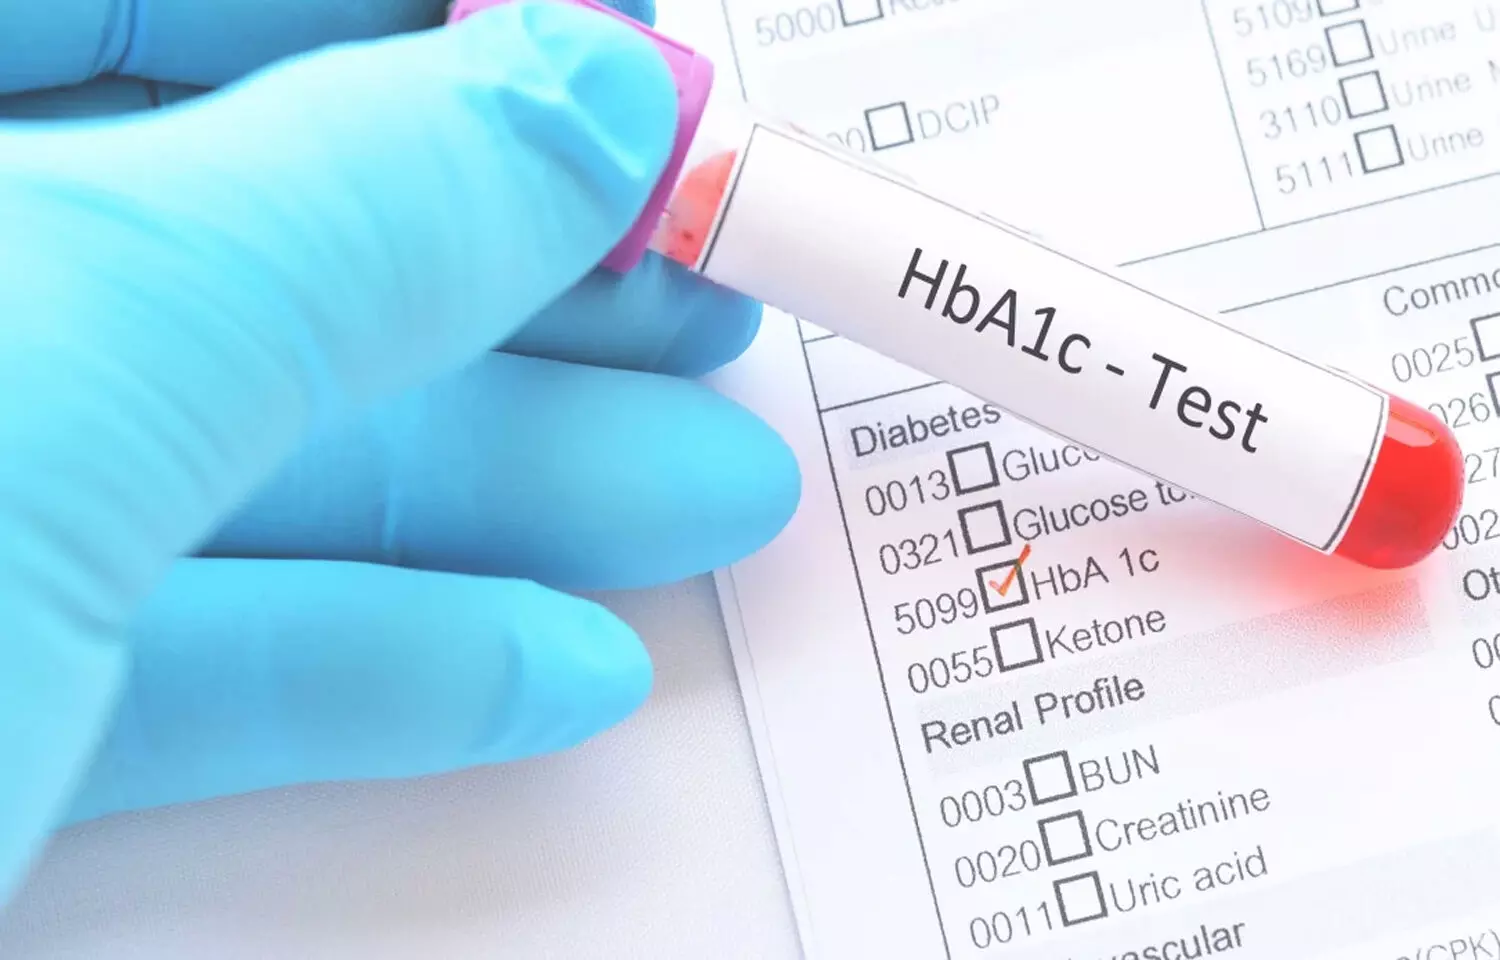 HbA1c useful for identifying women at risk for pregnancy complications: Study